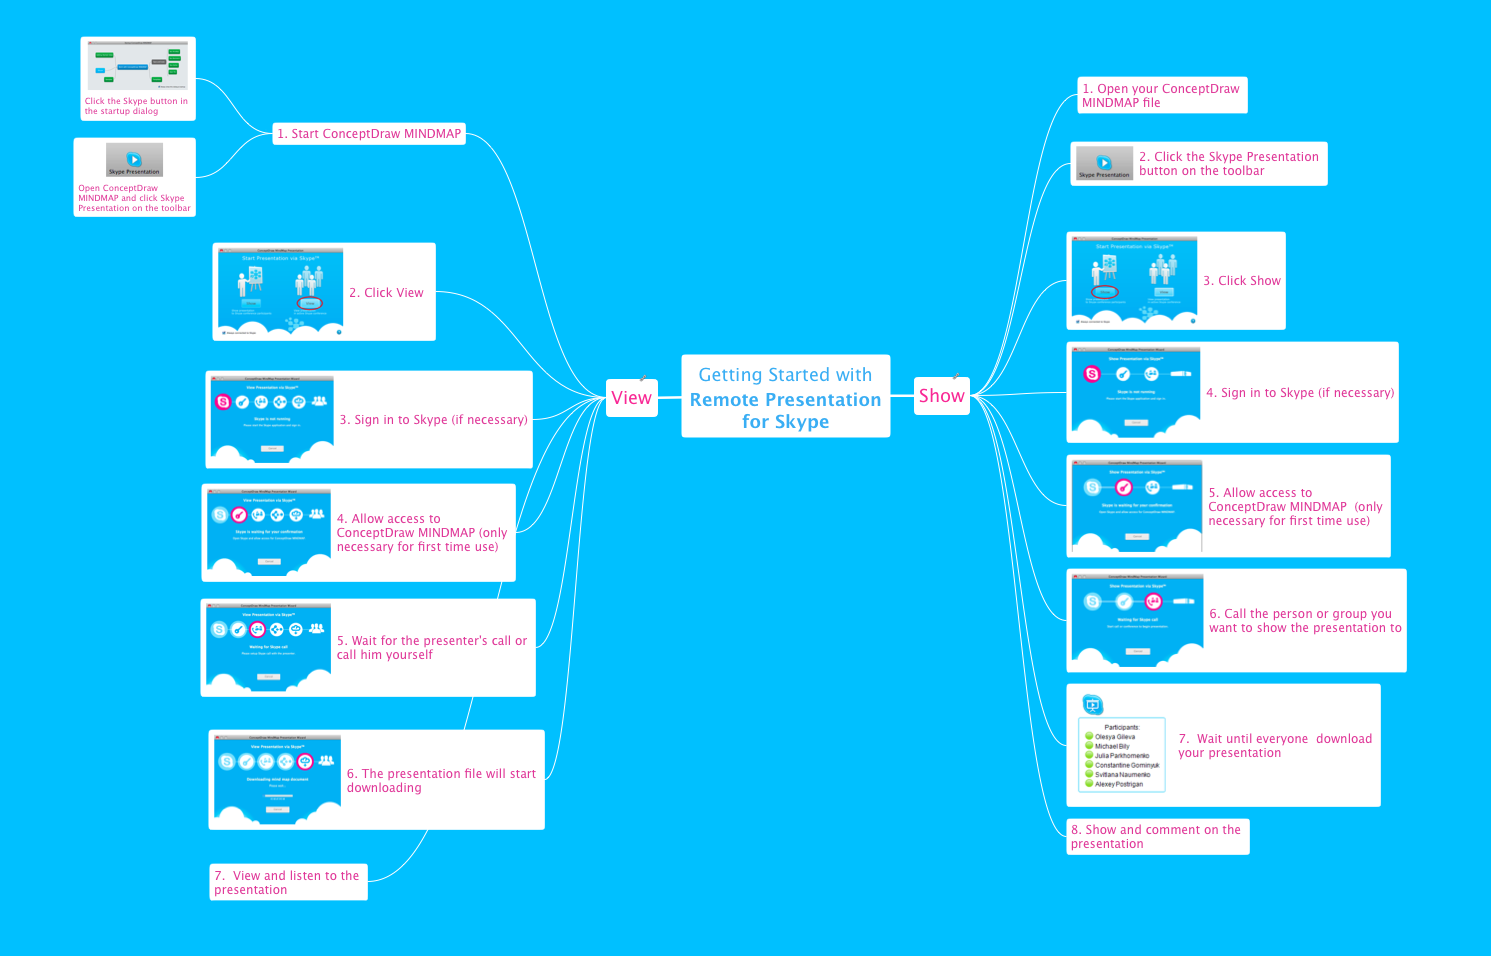 Getting Started with Remote Presentation for Skype mind map example